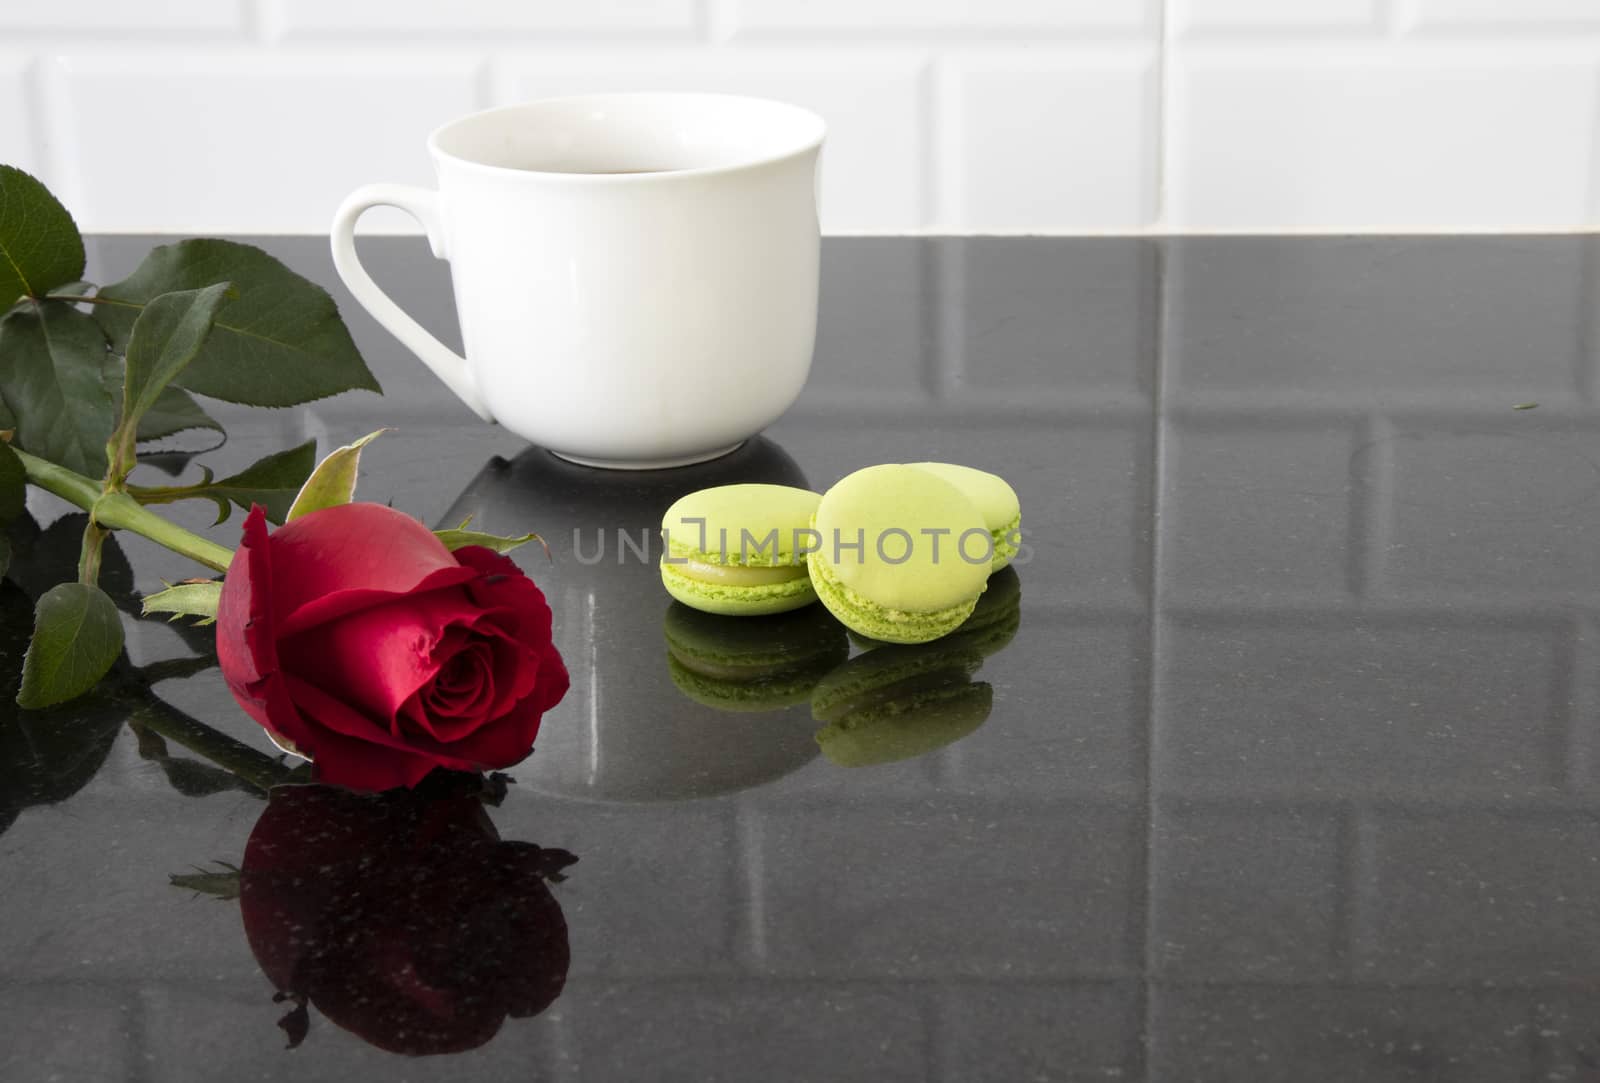 A white ceramic cup with pieces of macarons and a red rose on a black granite kitchen counter.